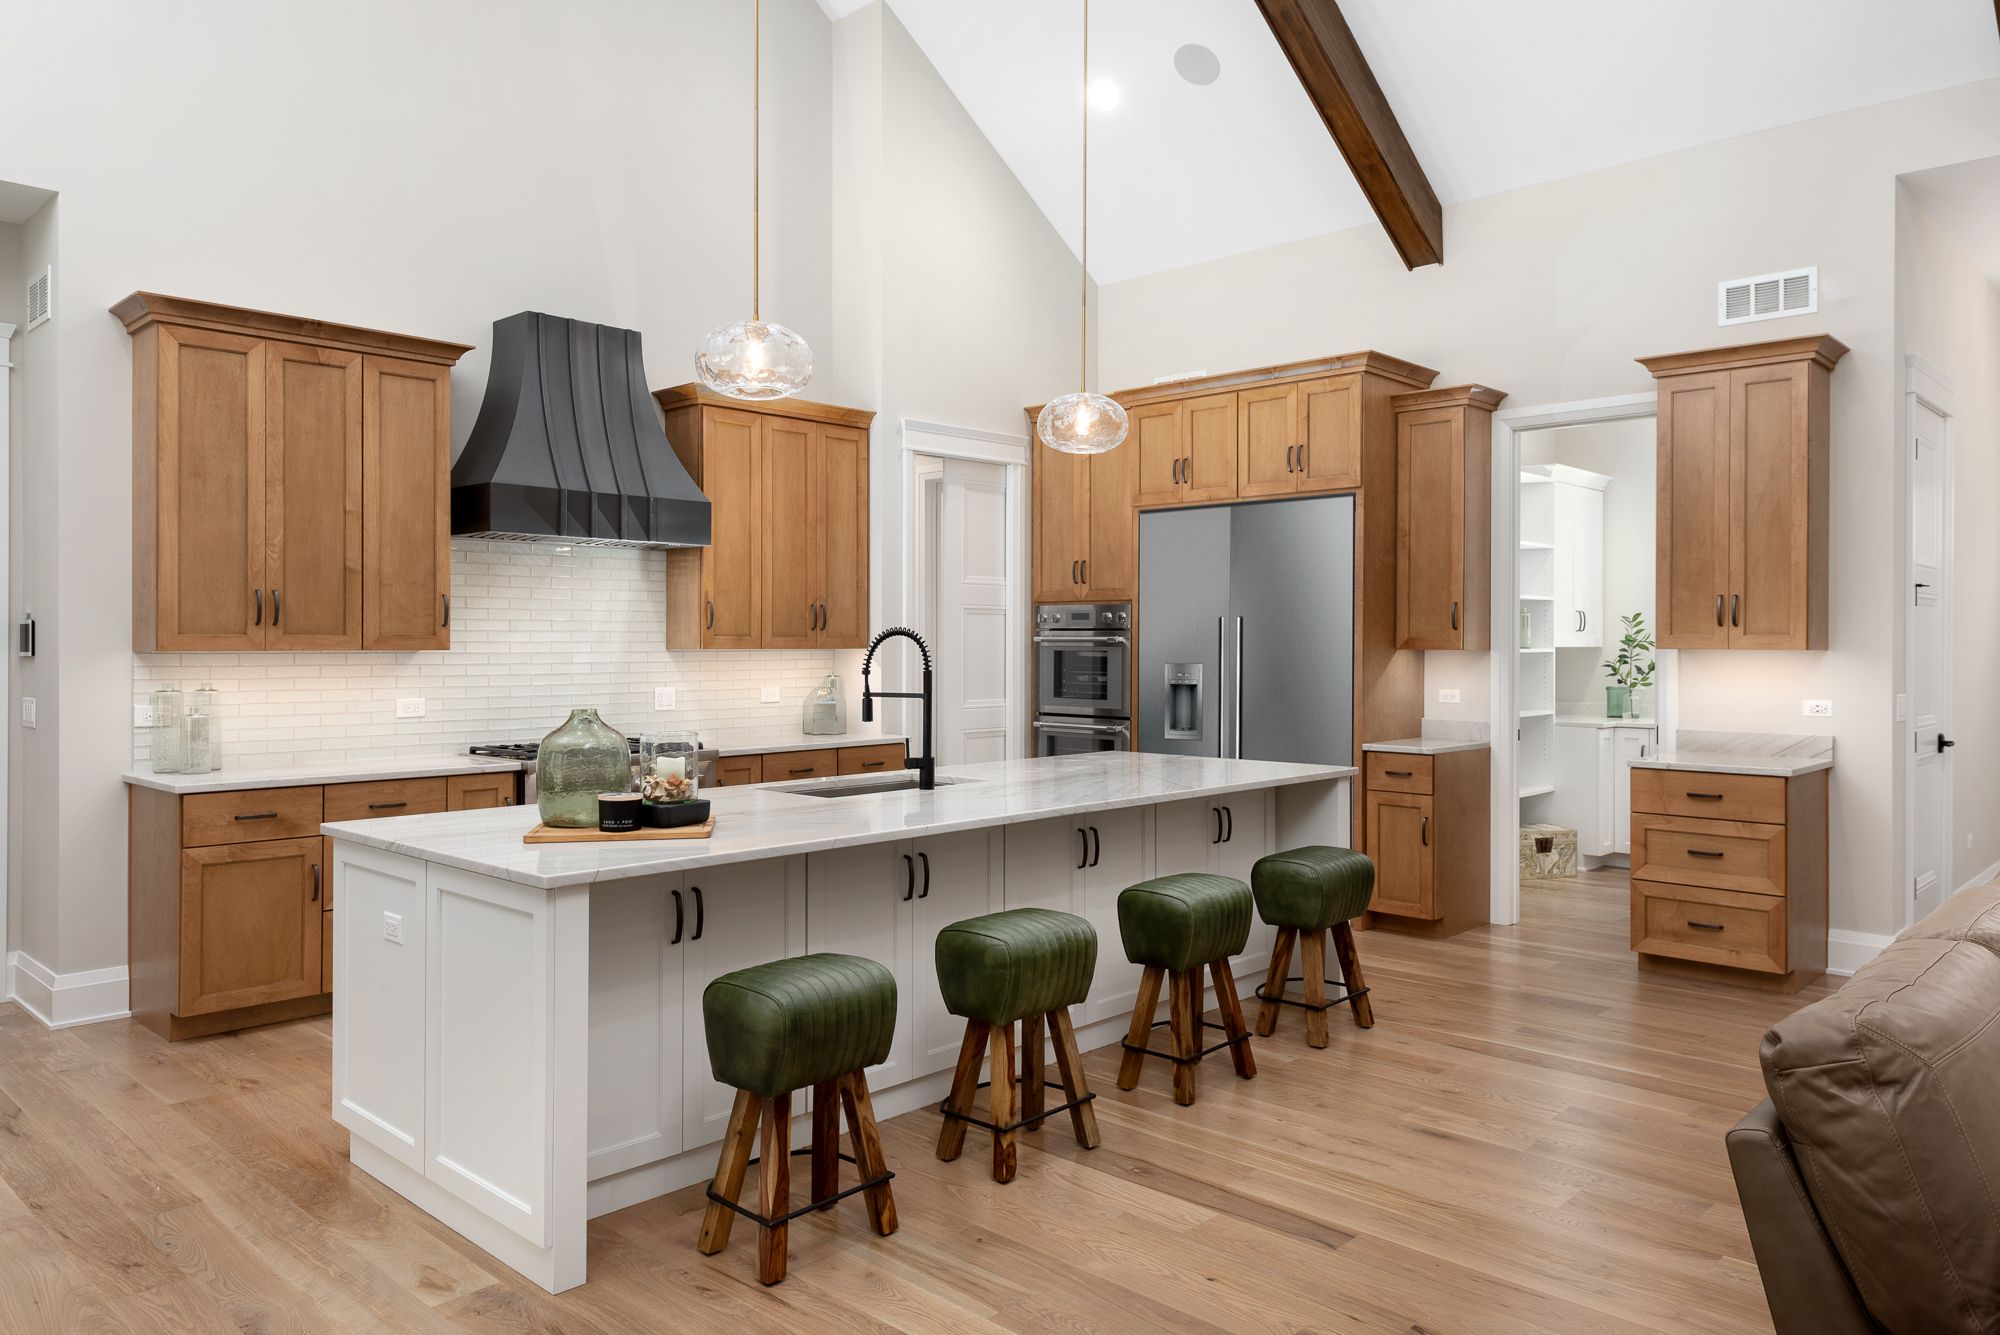 Modern farmhouse kitchen with high ceiling, wood beams and black vent hood